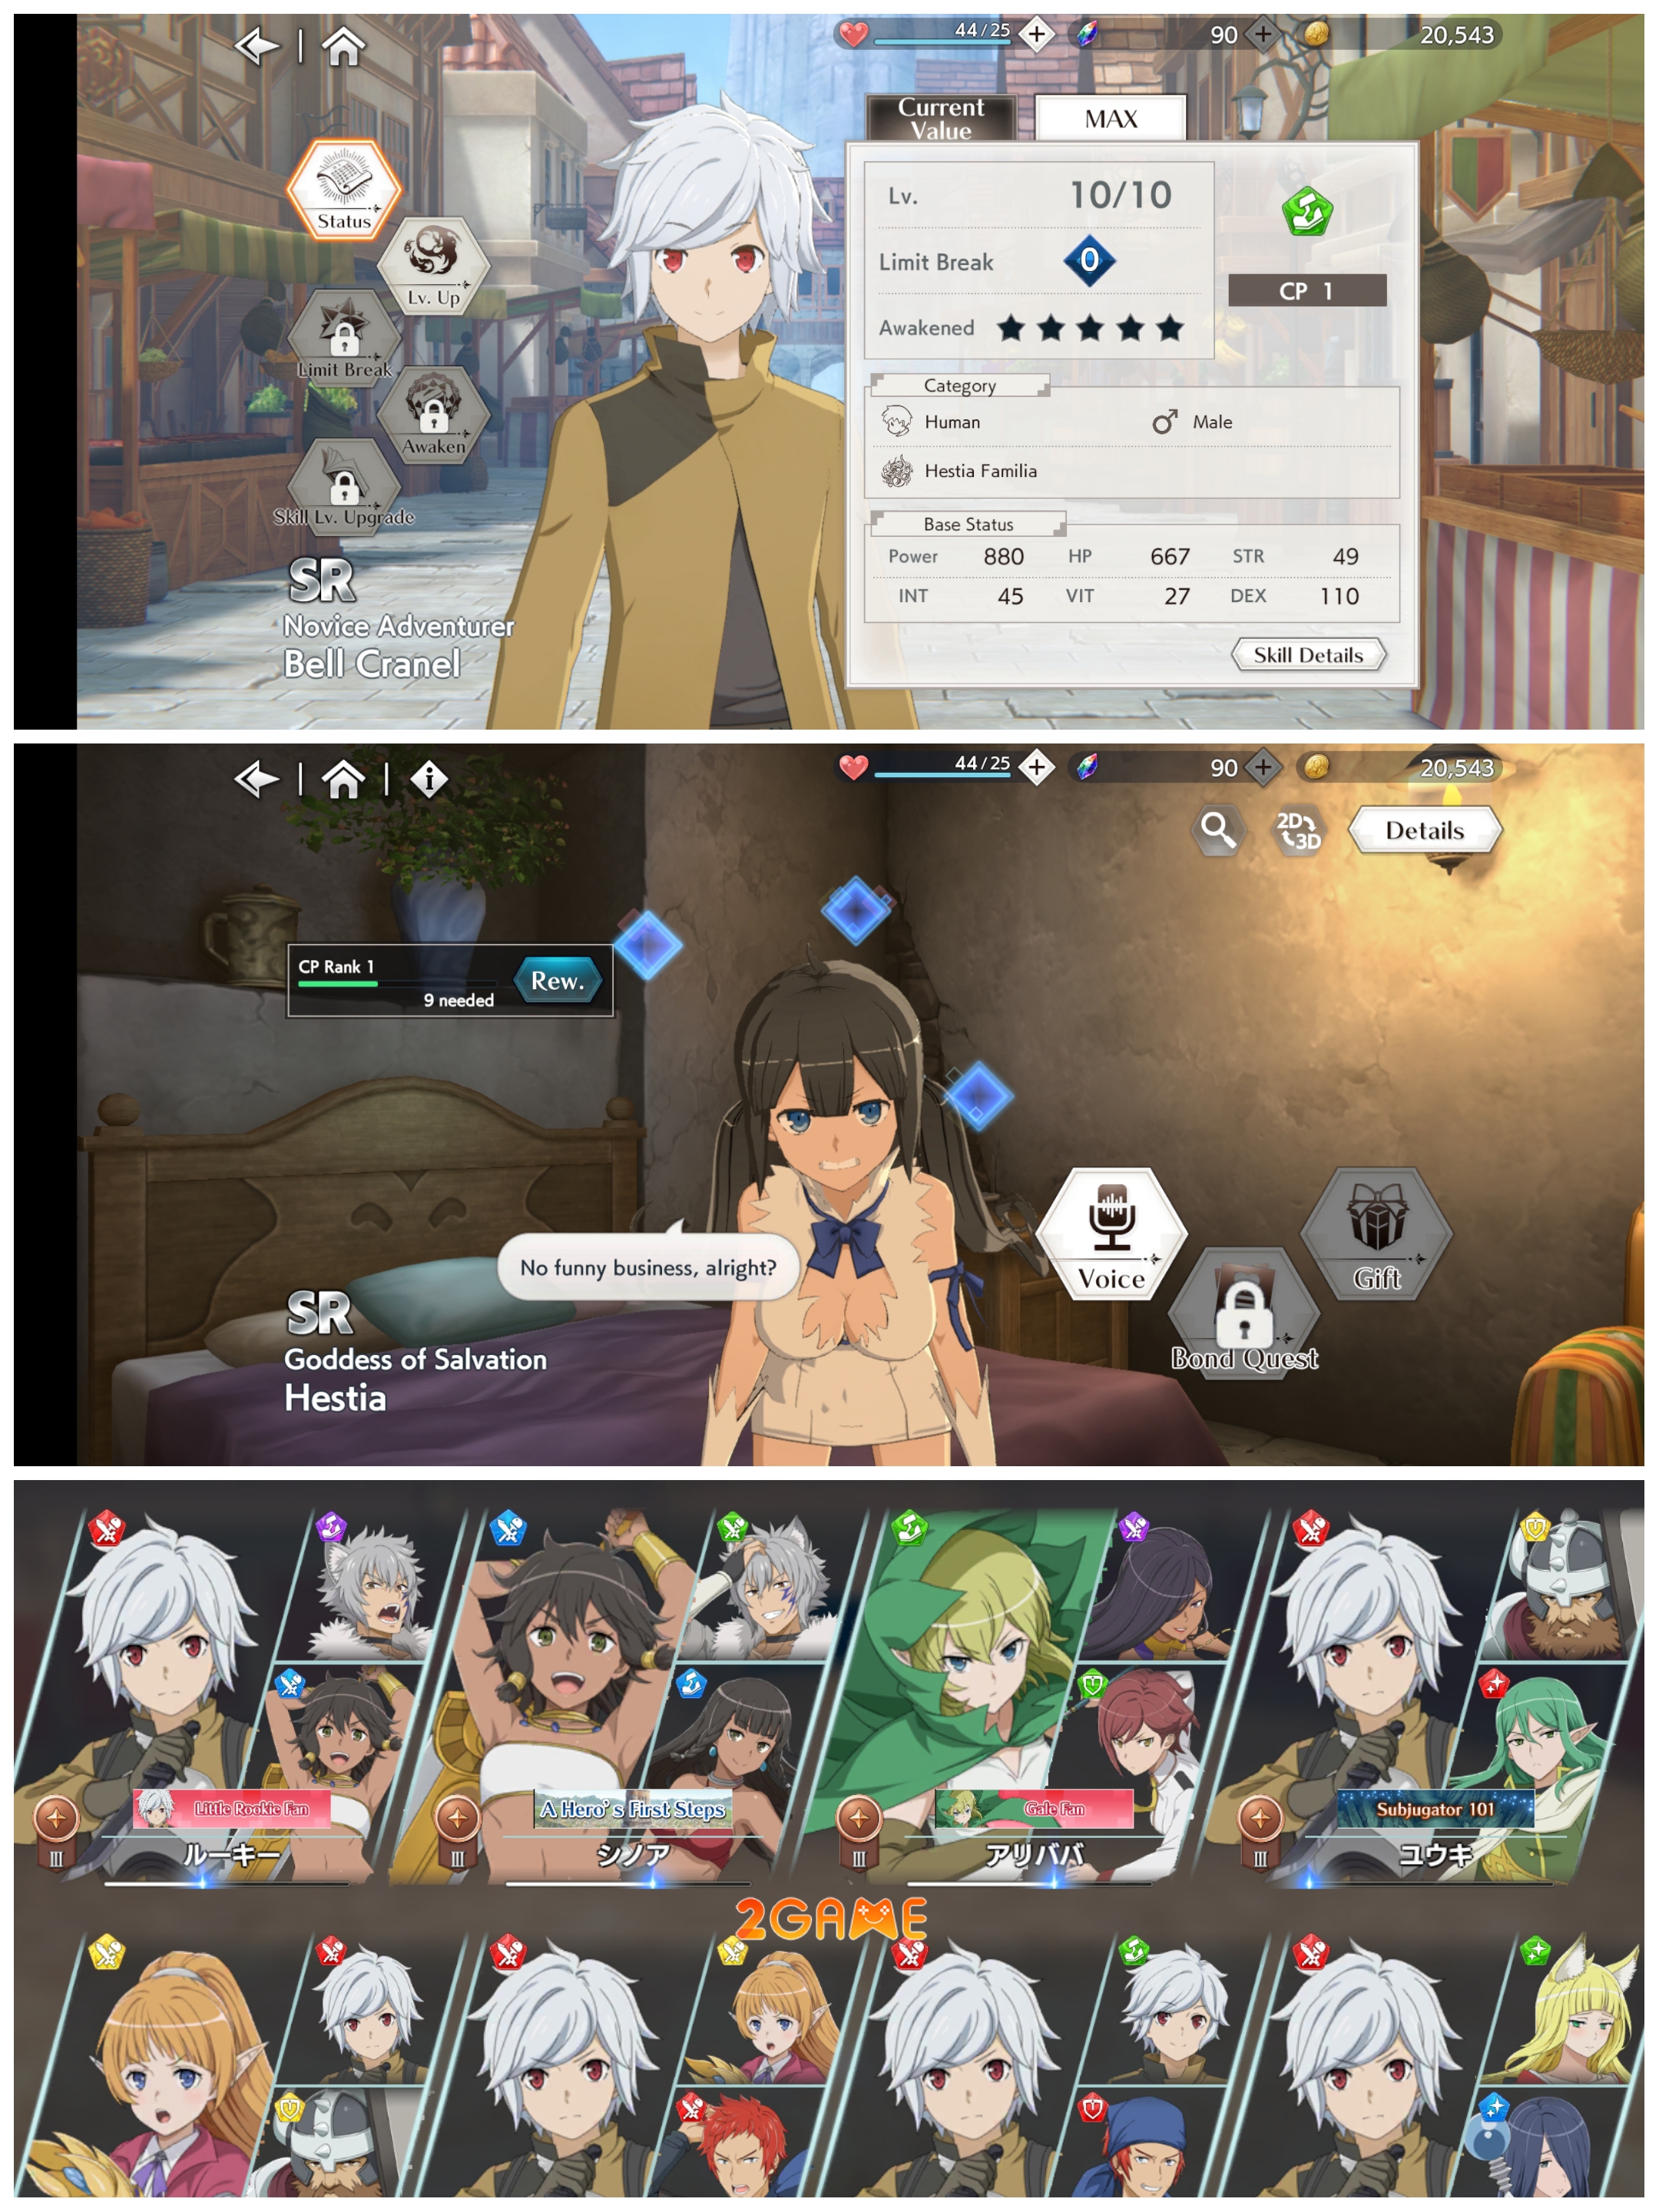 [Game Android] DanMachi BATTLE CHRONICLE